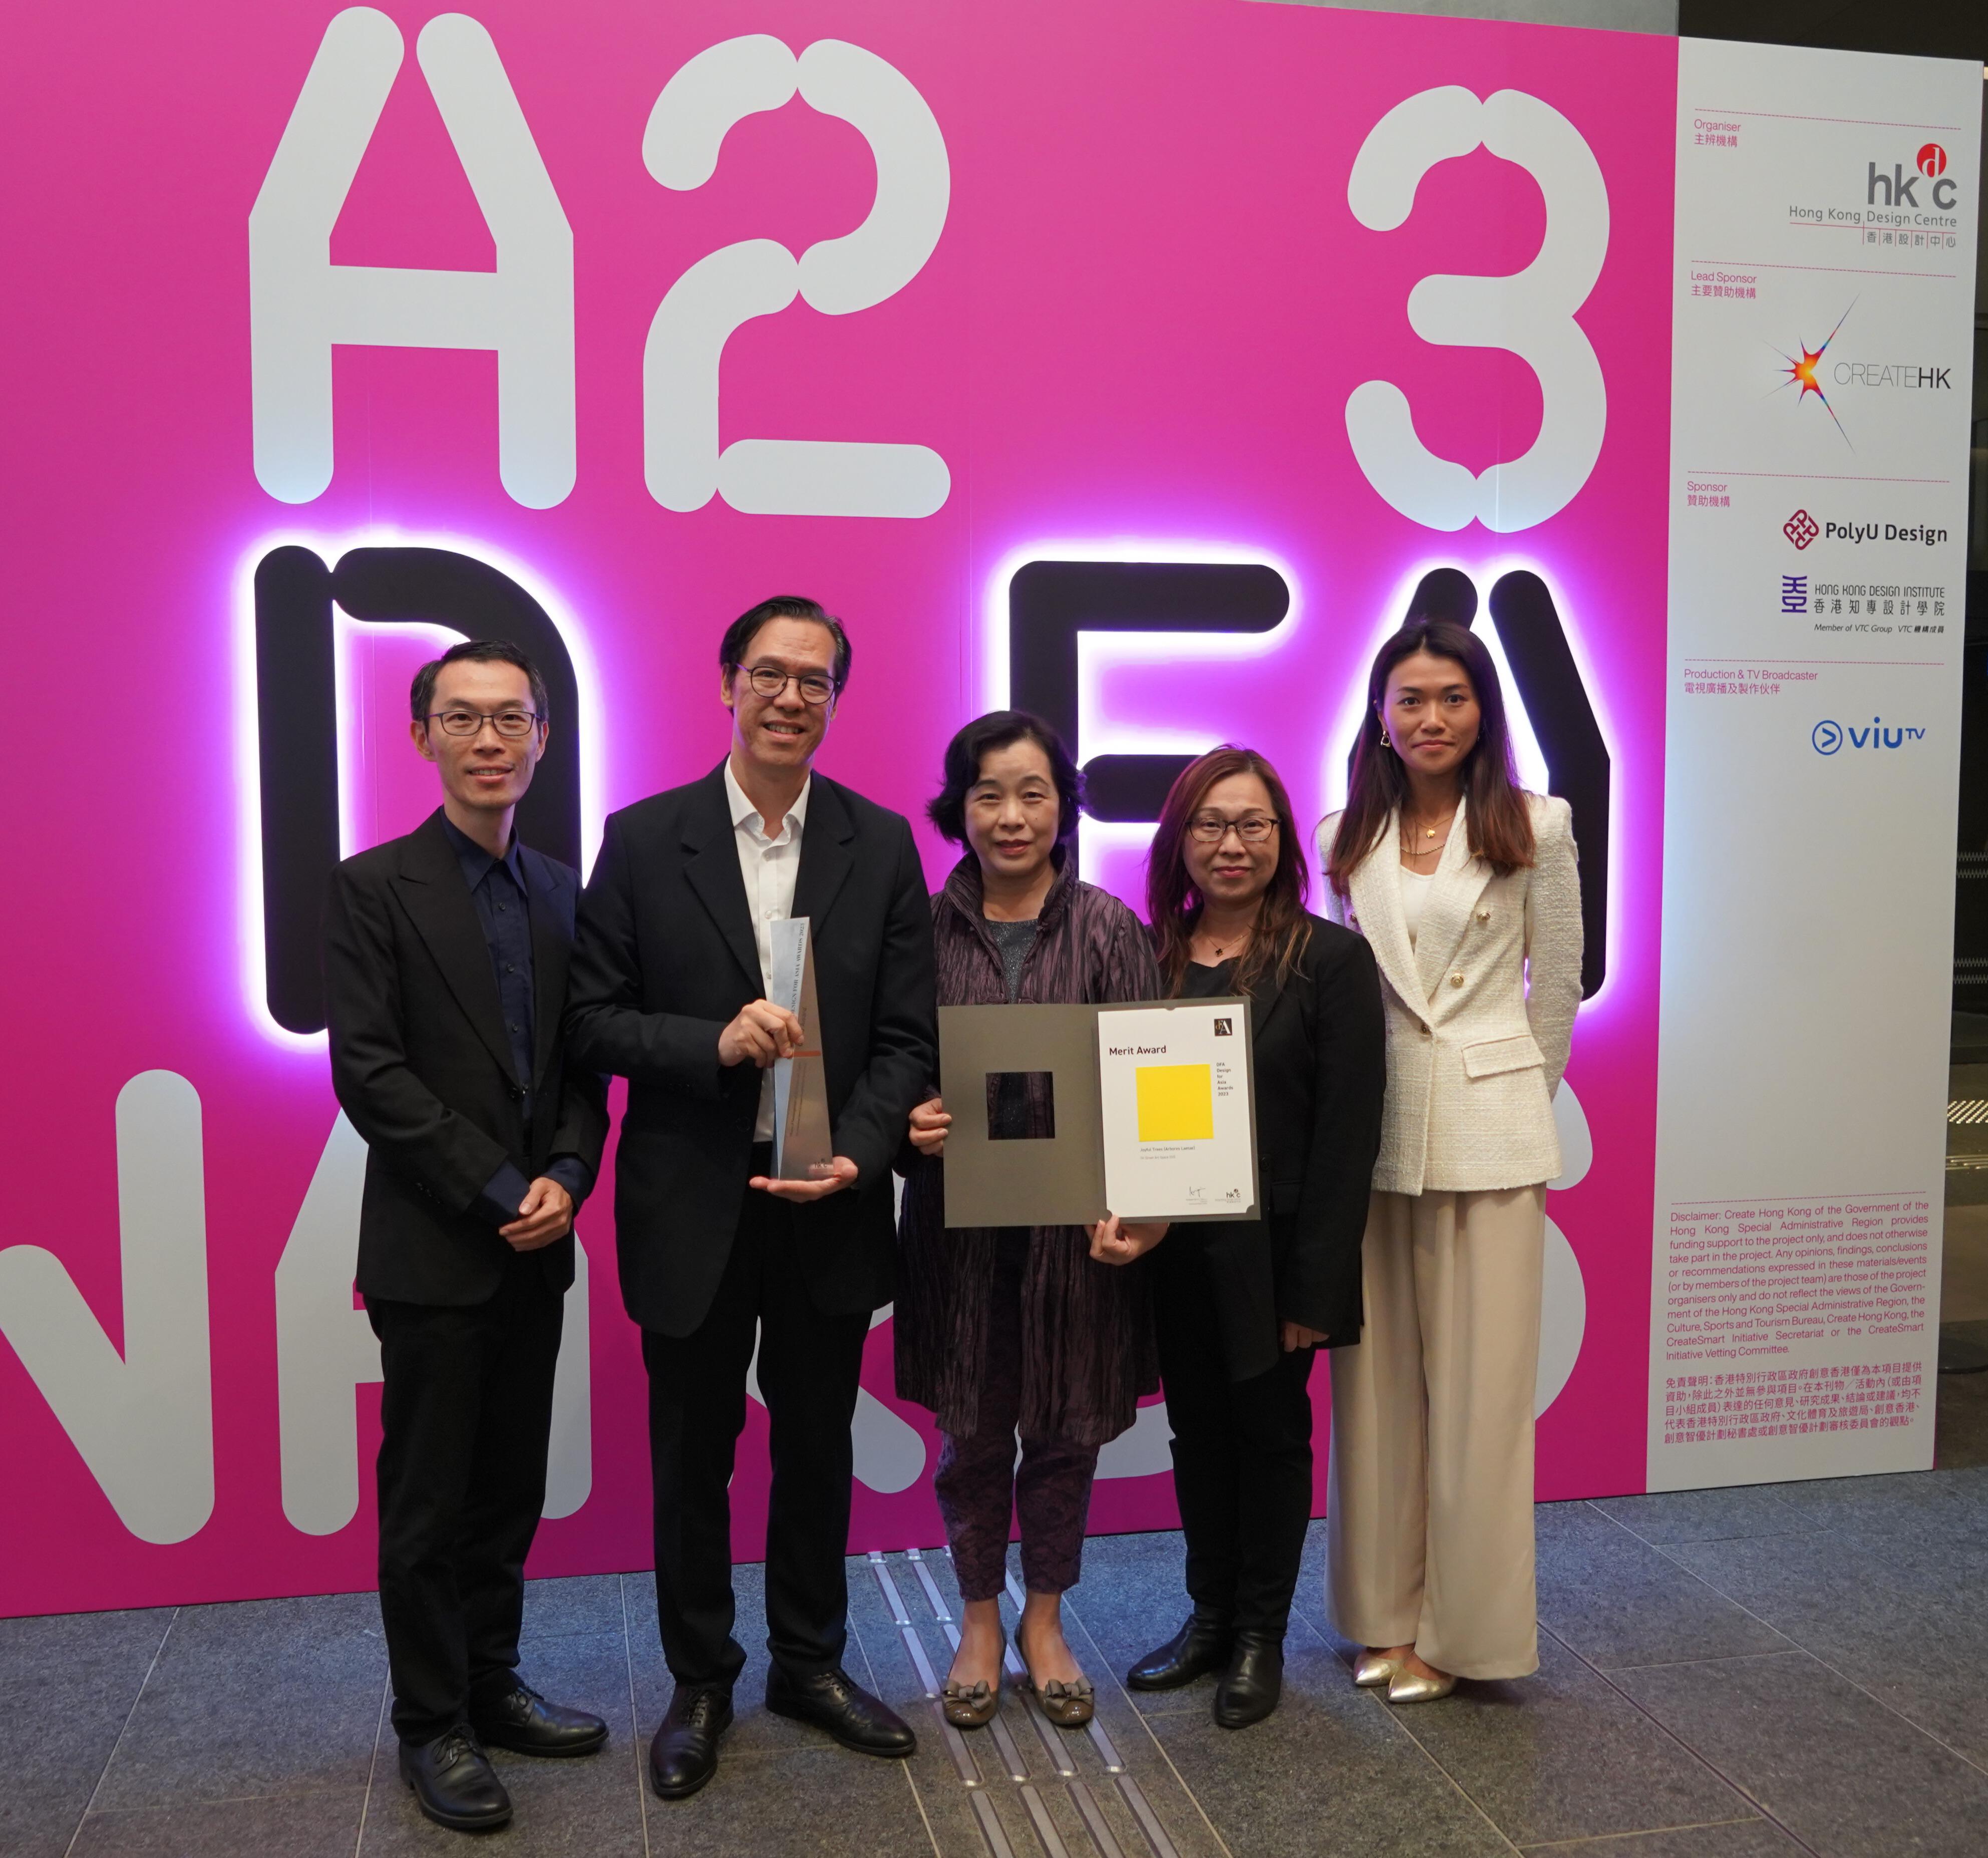 The Phase II Development of Oil Street Art Space (Oi!) and art project "Joyful Trees (Arbores Laetae)" of Oi! have respectively received the Grand Award and the Merit Award (Spatial Design) of the DFA Design for Asia Awards 2023. The award ceremony was held on November 28 at the Hong Kong Palace Museum. Photo shows (from left) Senior Architect of the Architectural Services Department (ArchSD) Mr Donald Leung; Chief Architect of the ArchSD Mr Thomas Wan; the Head of Art Promotion Office, Dr Lesley Lau; the Curator of Oi!, Ms Joan Chung; and Architect of the ArchSD Miss Geri Chan at the ceremony.